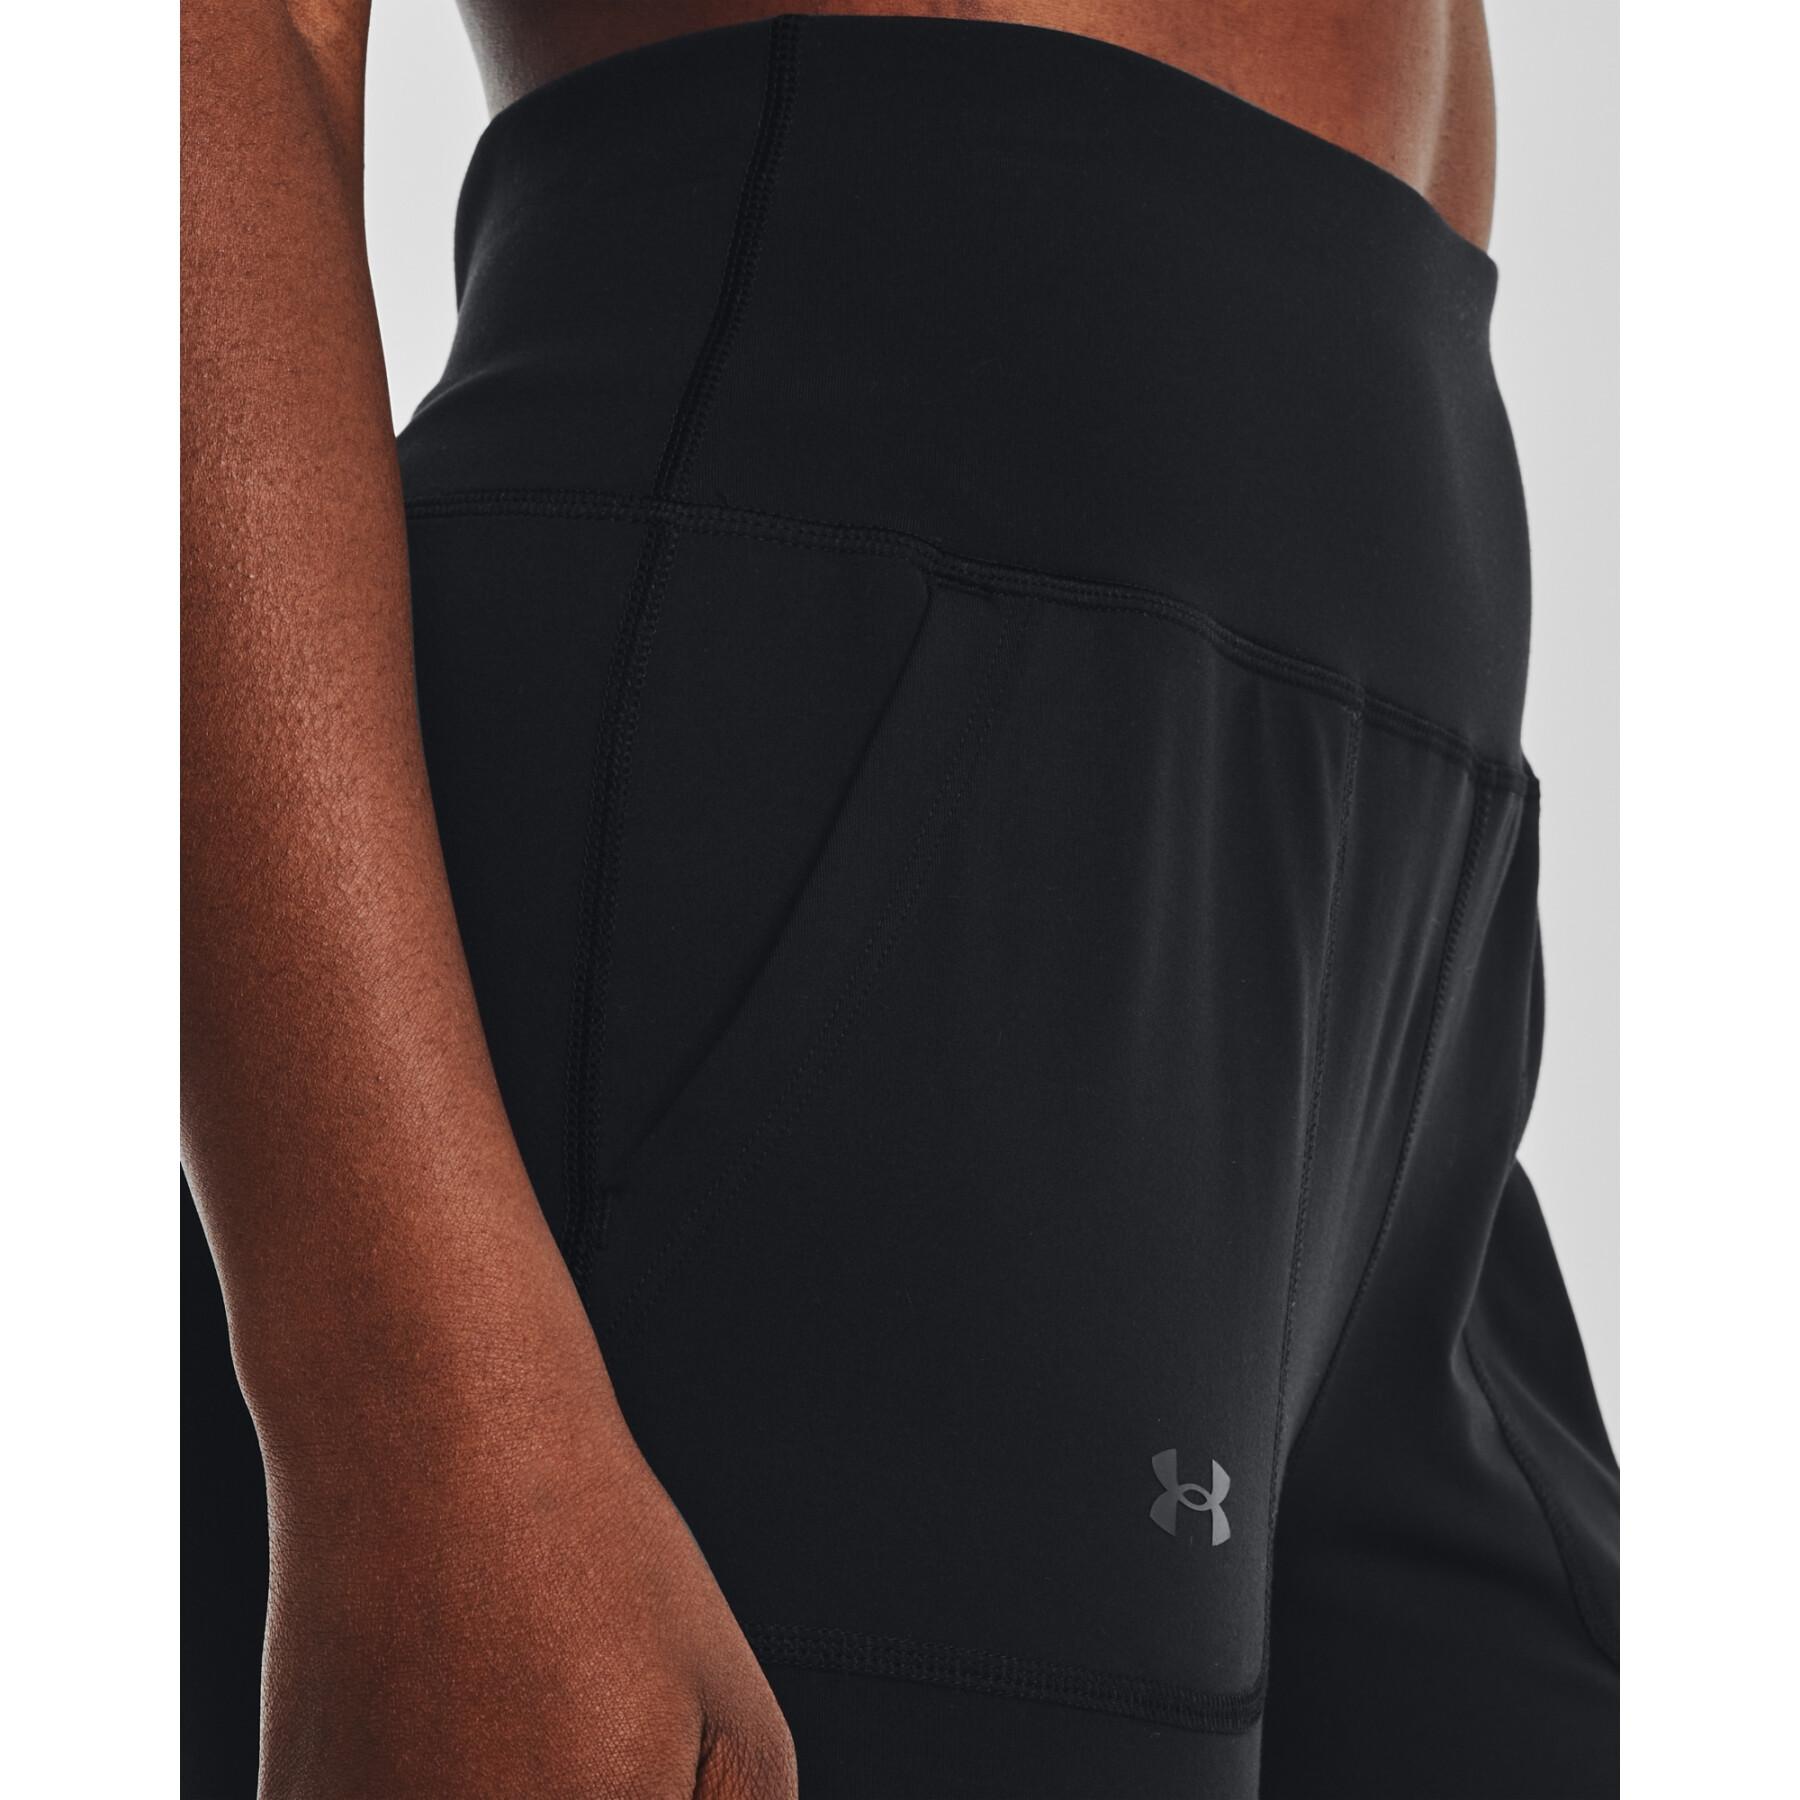 Joggers donna Under Armour Motion